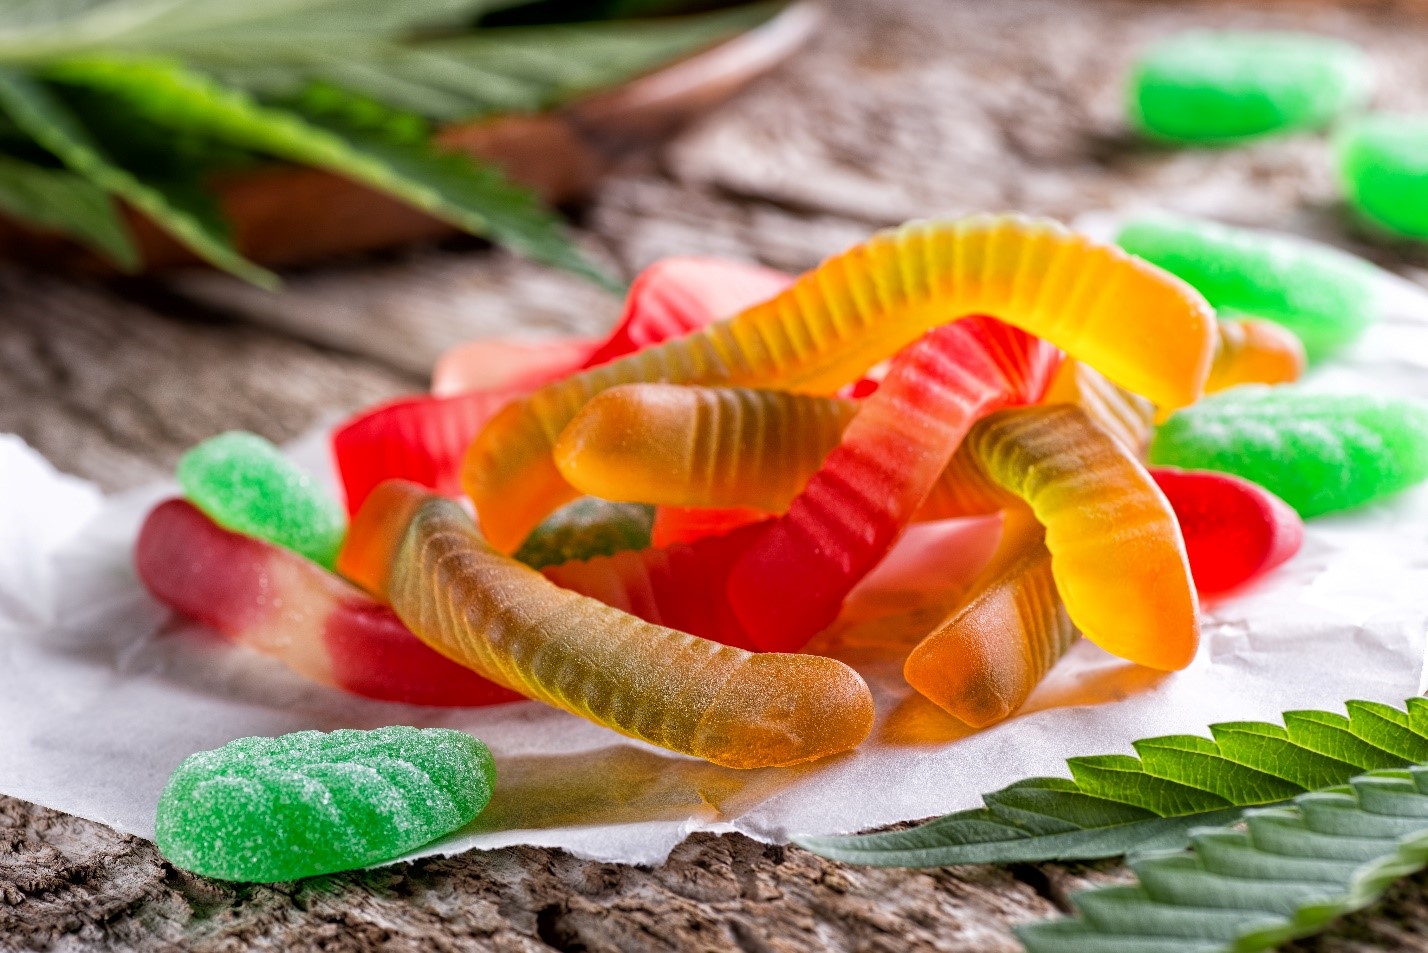 Hemp leaves and CBD infused gummy candies on wooden table